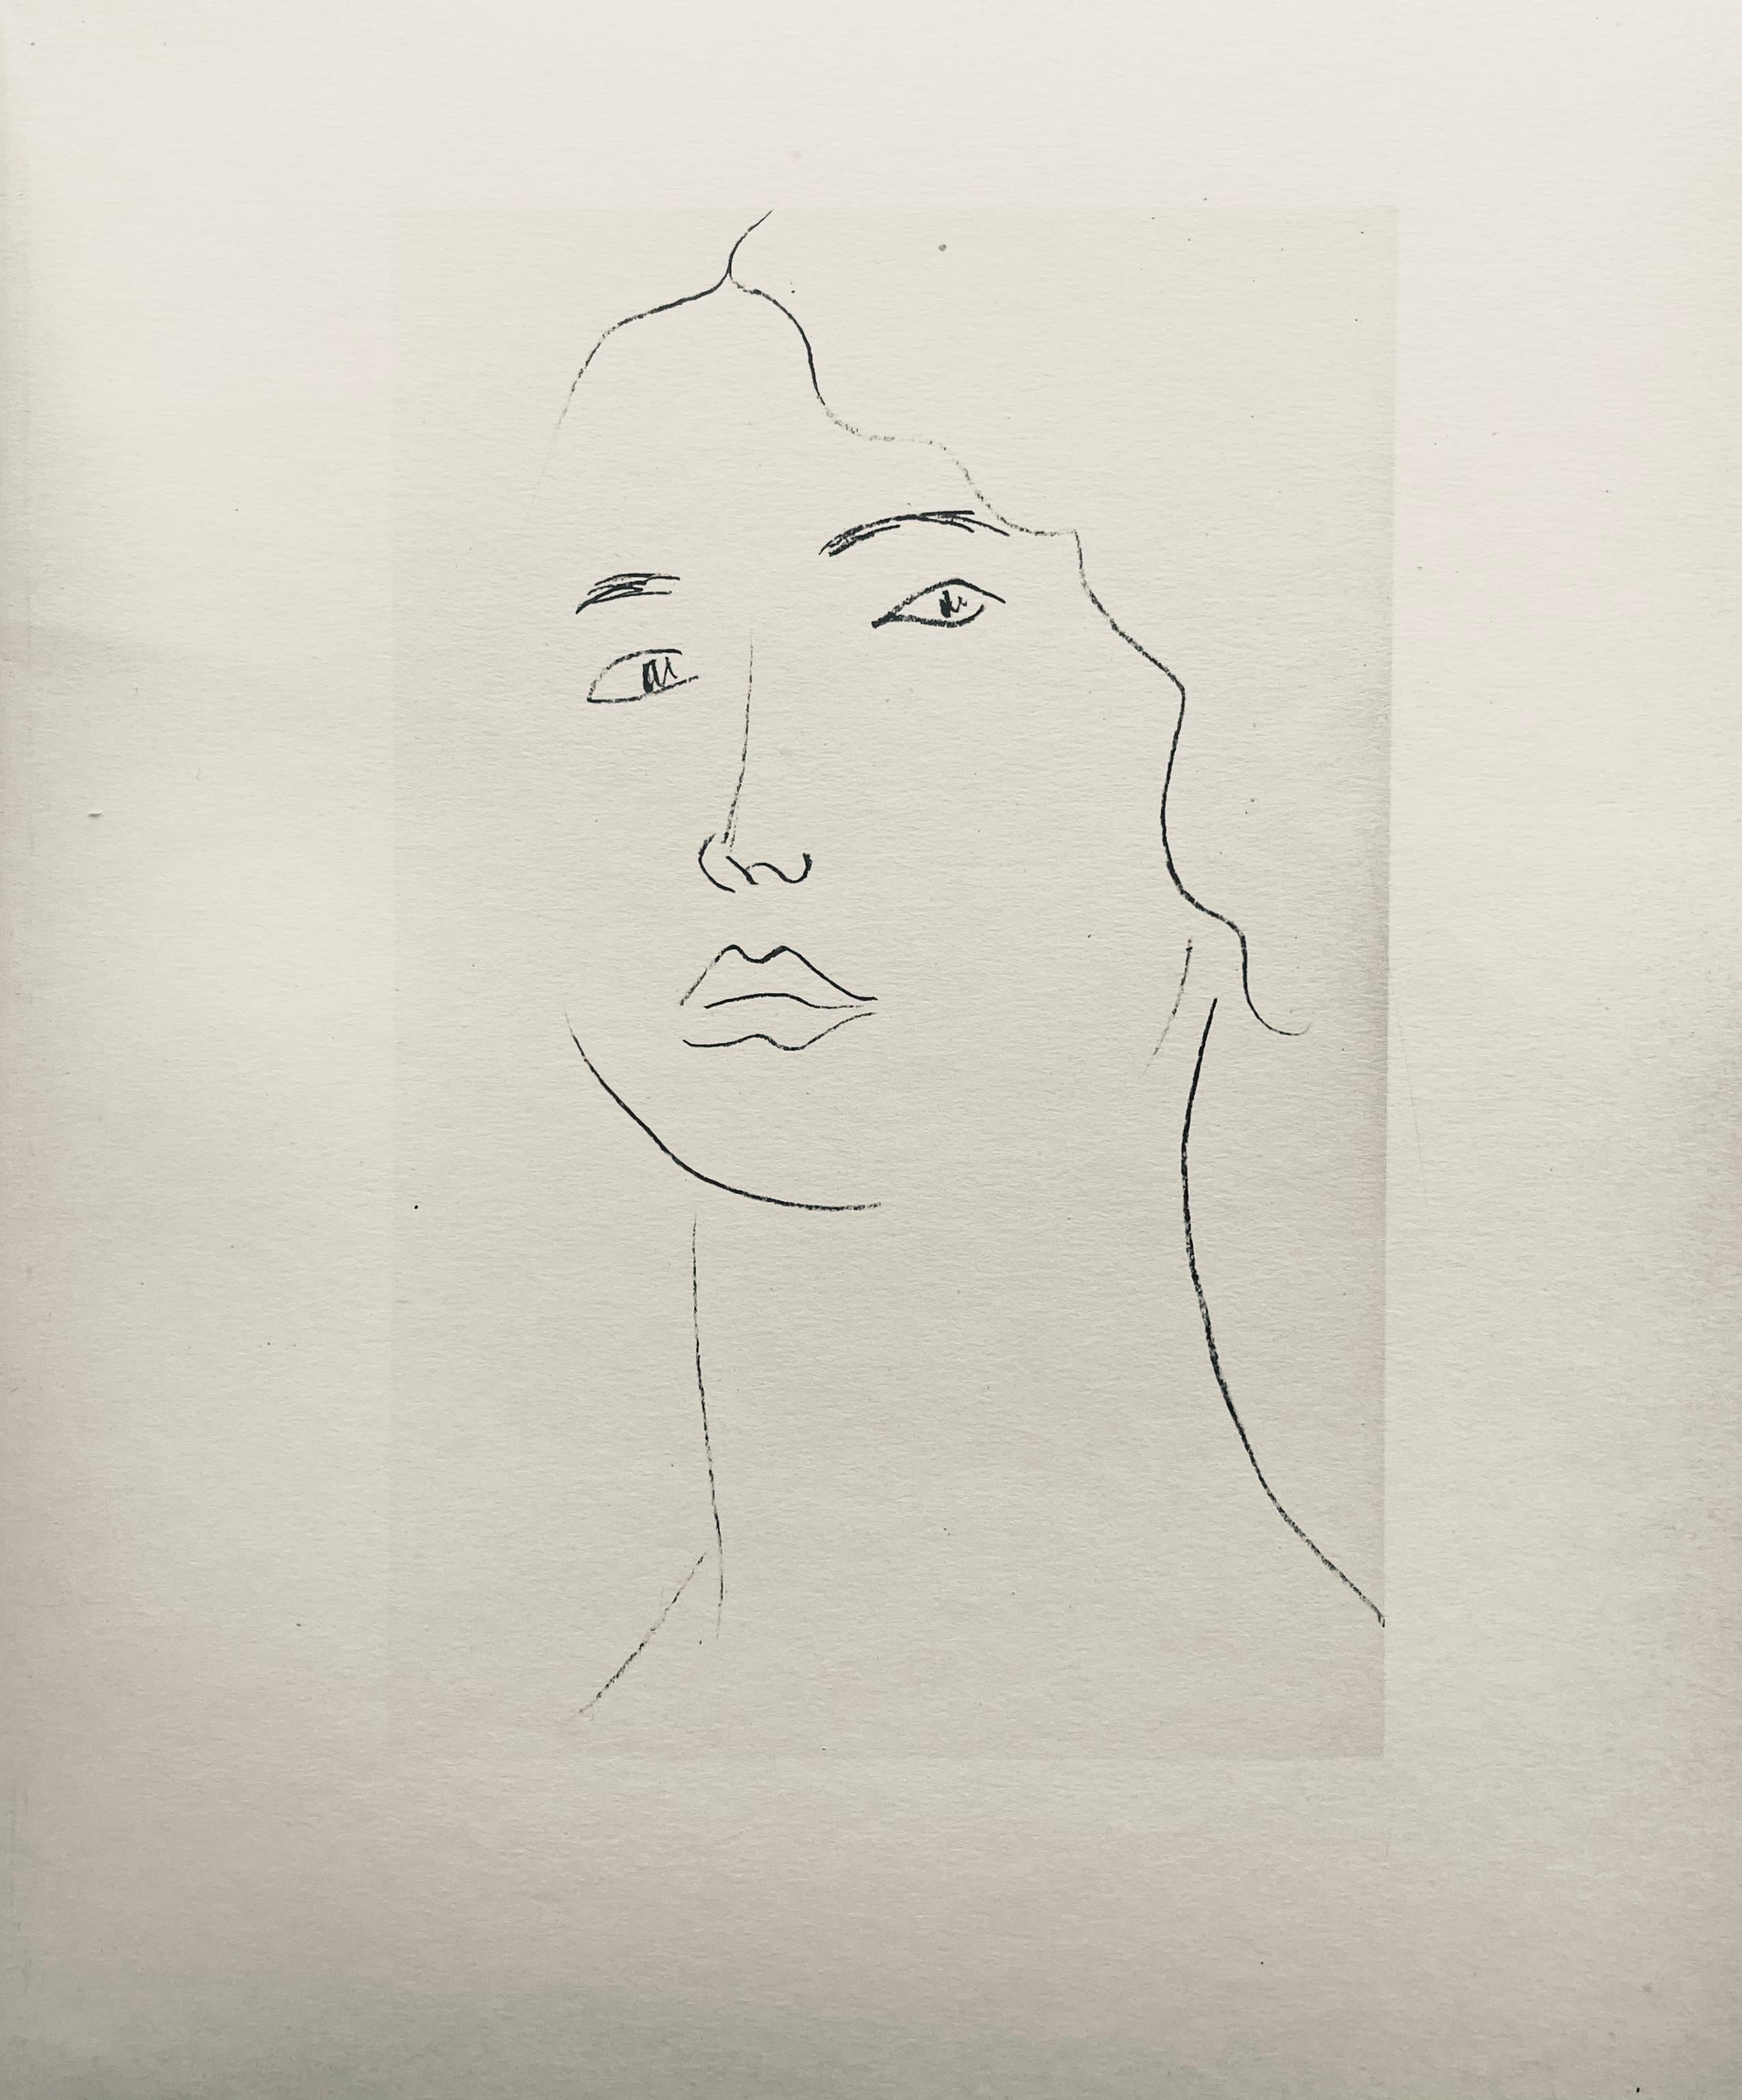 Lithograph on vélin Lafuma paper. Unsigned and unnumbered, as issued. Good Condition; never framed or matted. Notes: From the volume, Dessins de Henri-Matisse, 1925. Published by Éditions des Quatre Chemins, Paris; lithographic plates rendered by